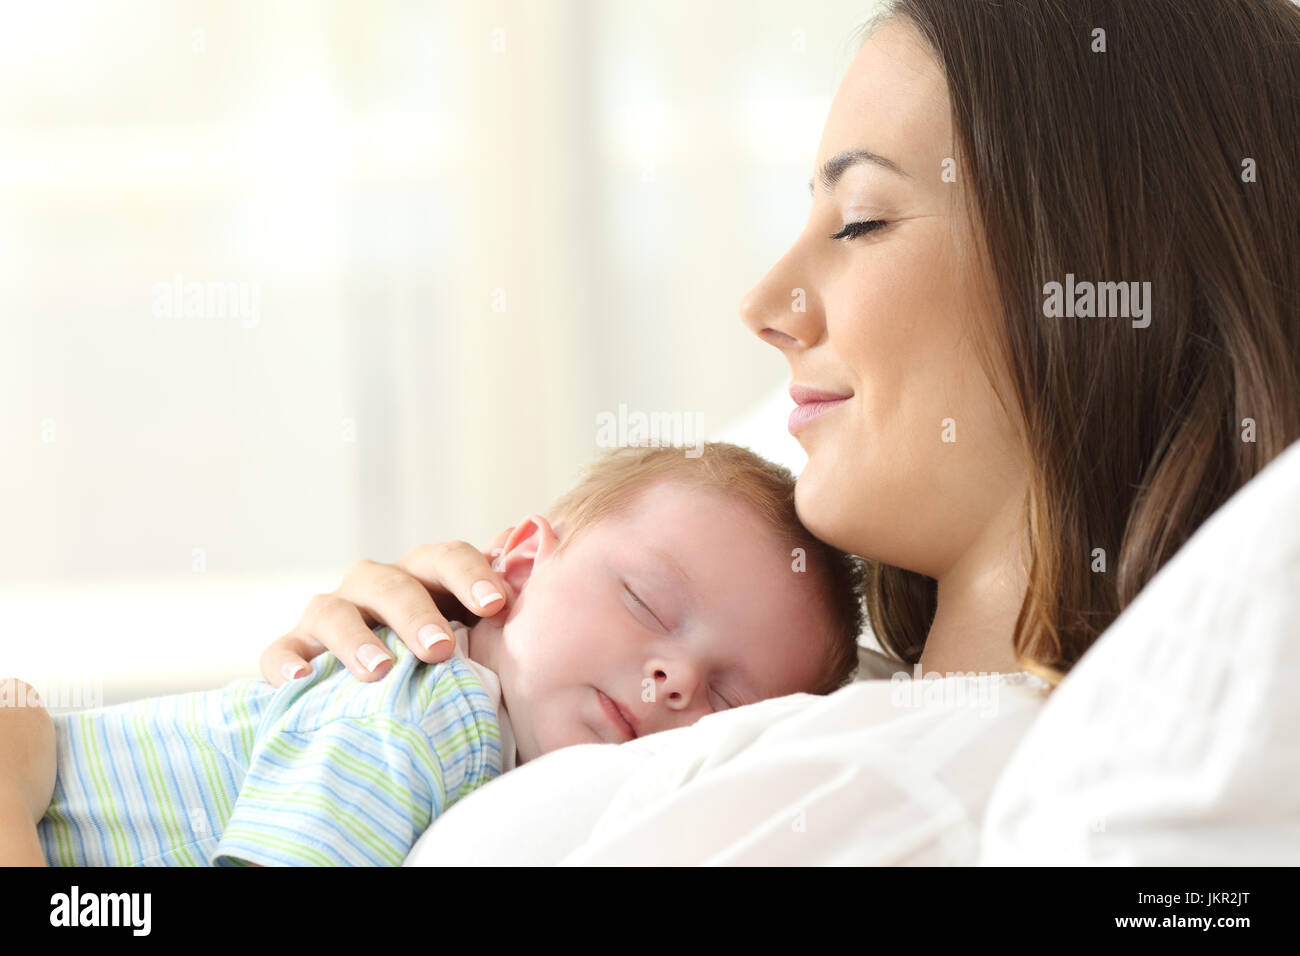 Profile of a happy mother sleeping with her baby on a bed at home Stock Photo